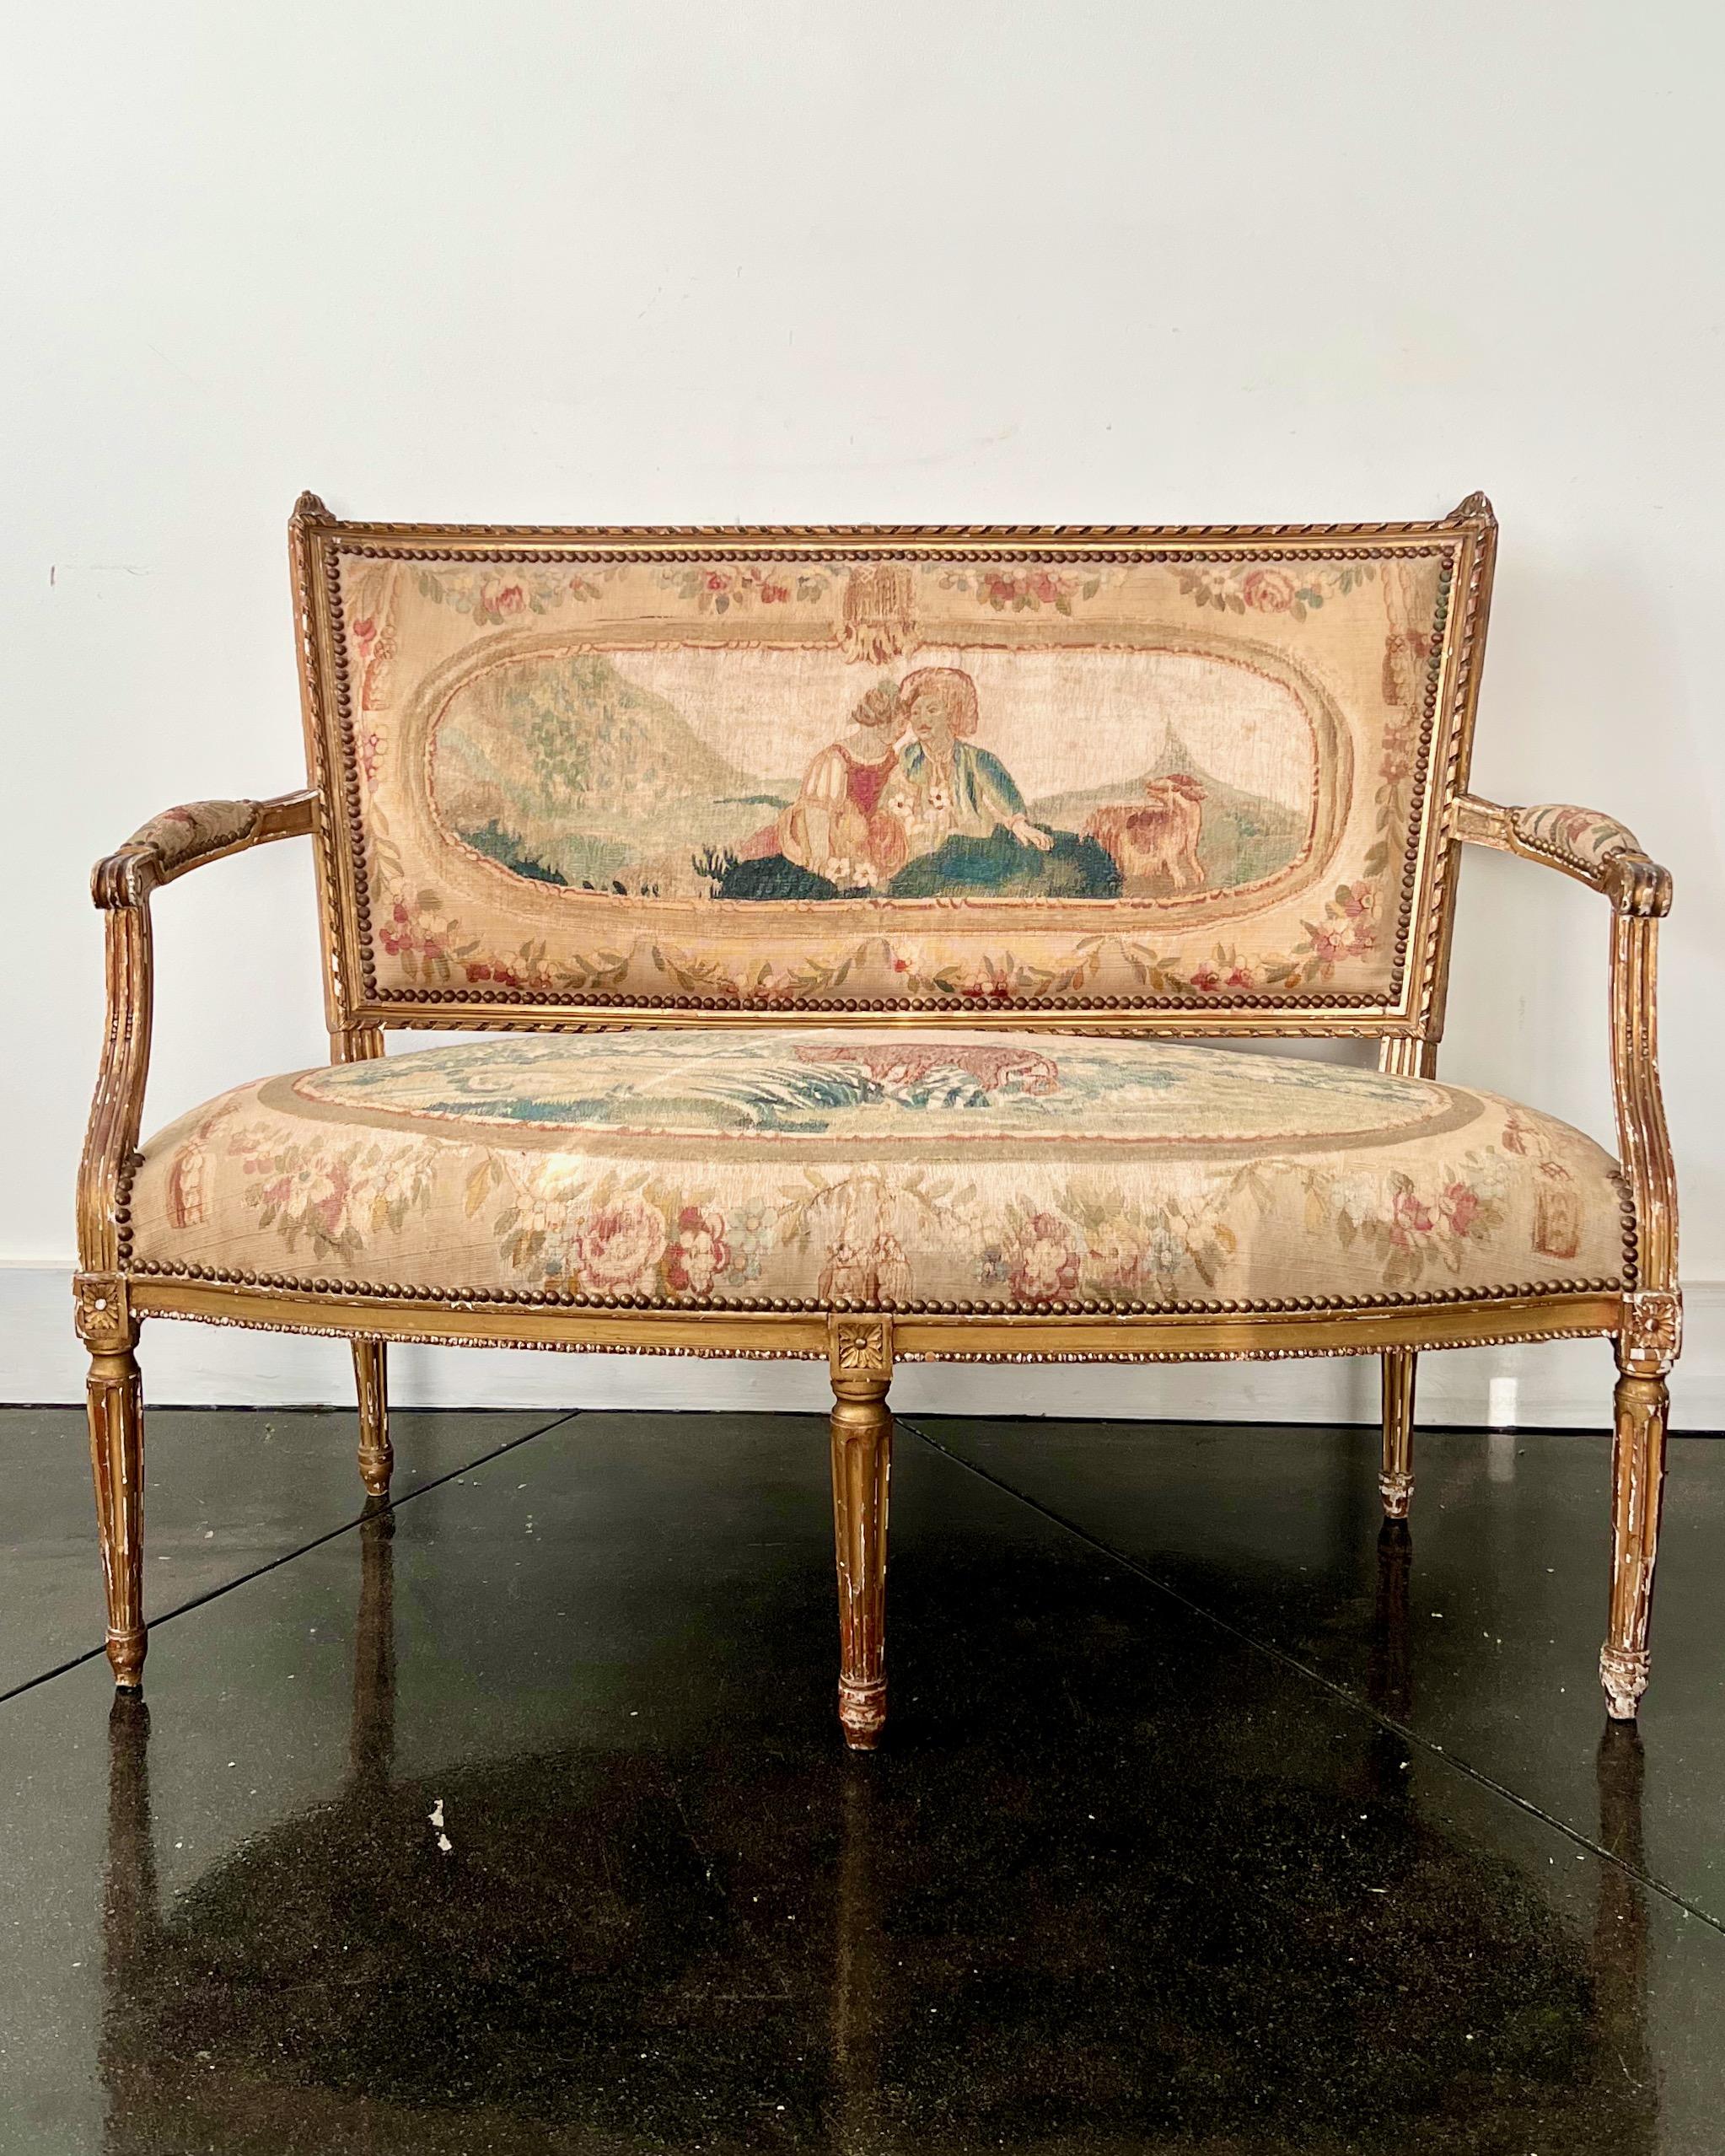 Charming small 19th century gilt wood Settee richly upholstered in hand-woven Aubusson tapestry.